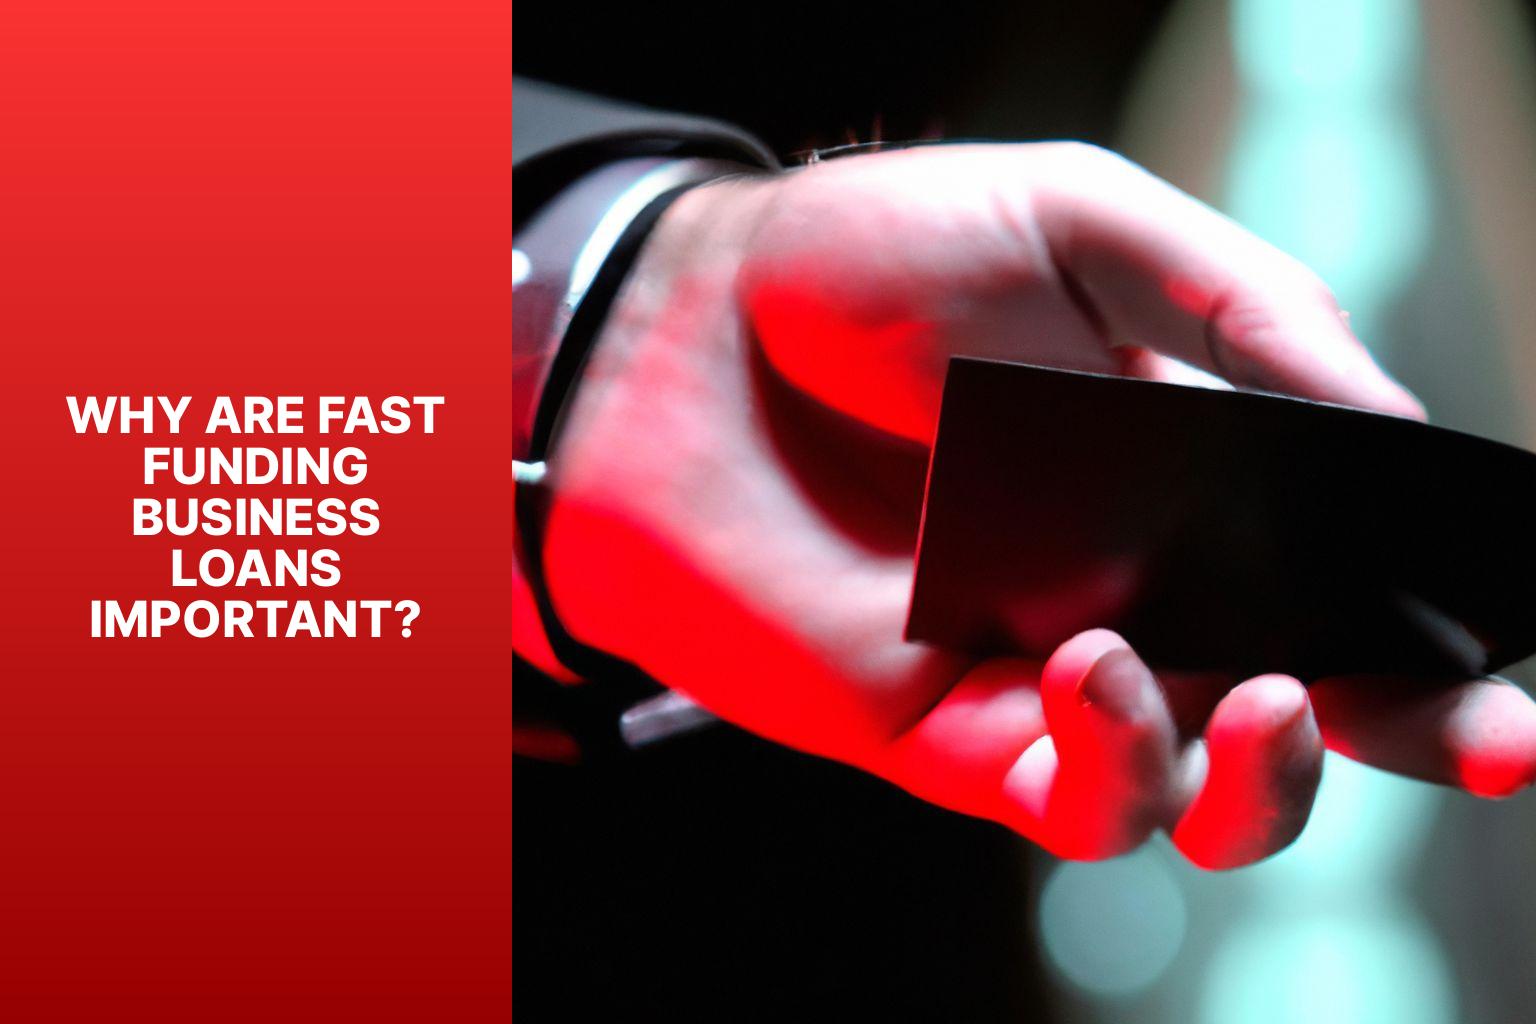 Why are Fast Funding Business Loans Important? - Fast Track to Funding: Understanding Fast Funding Business Loans 